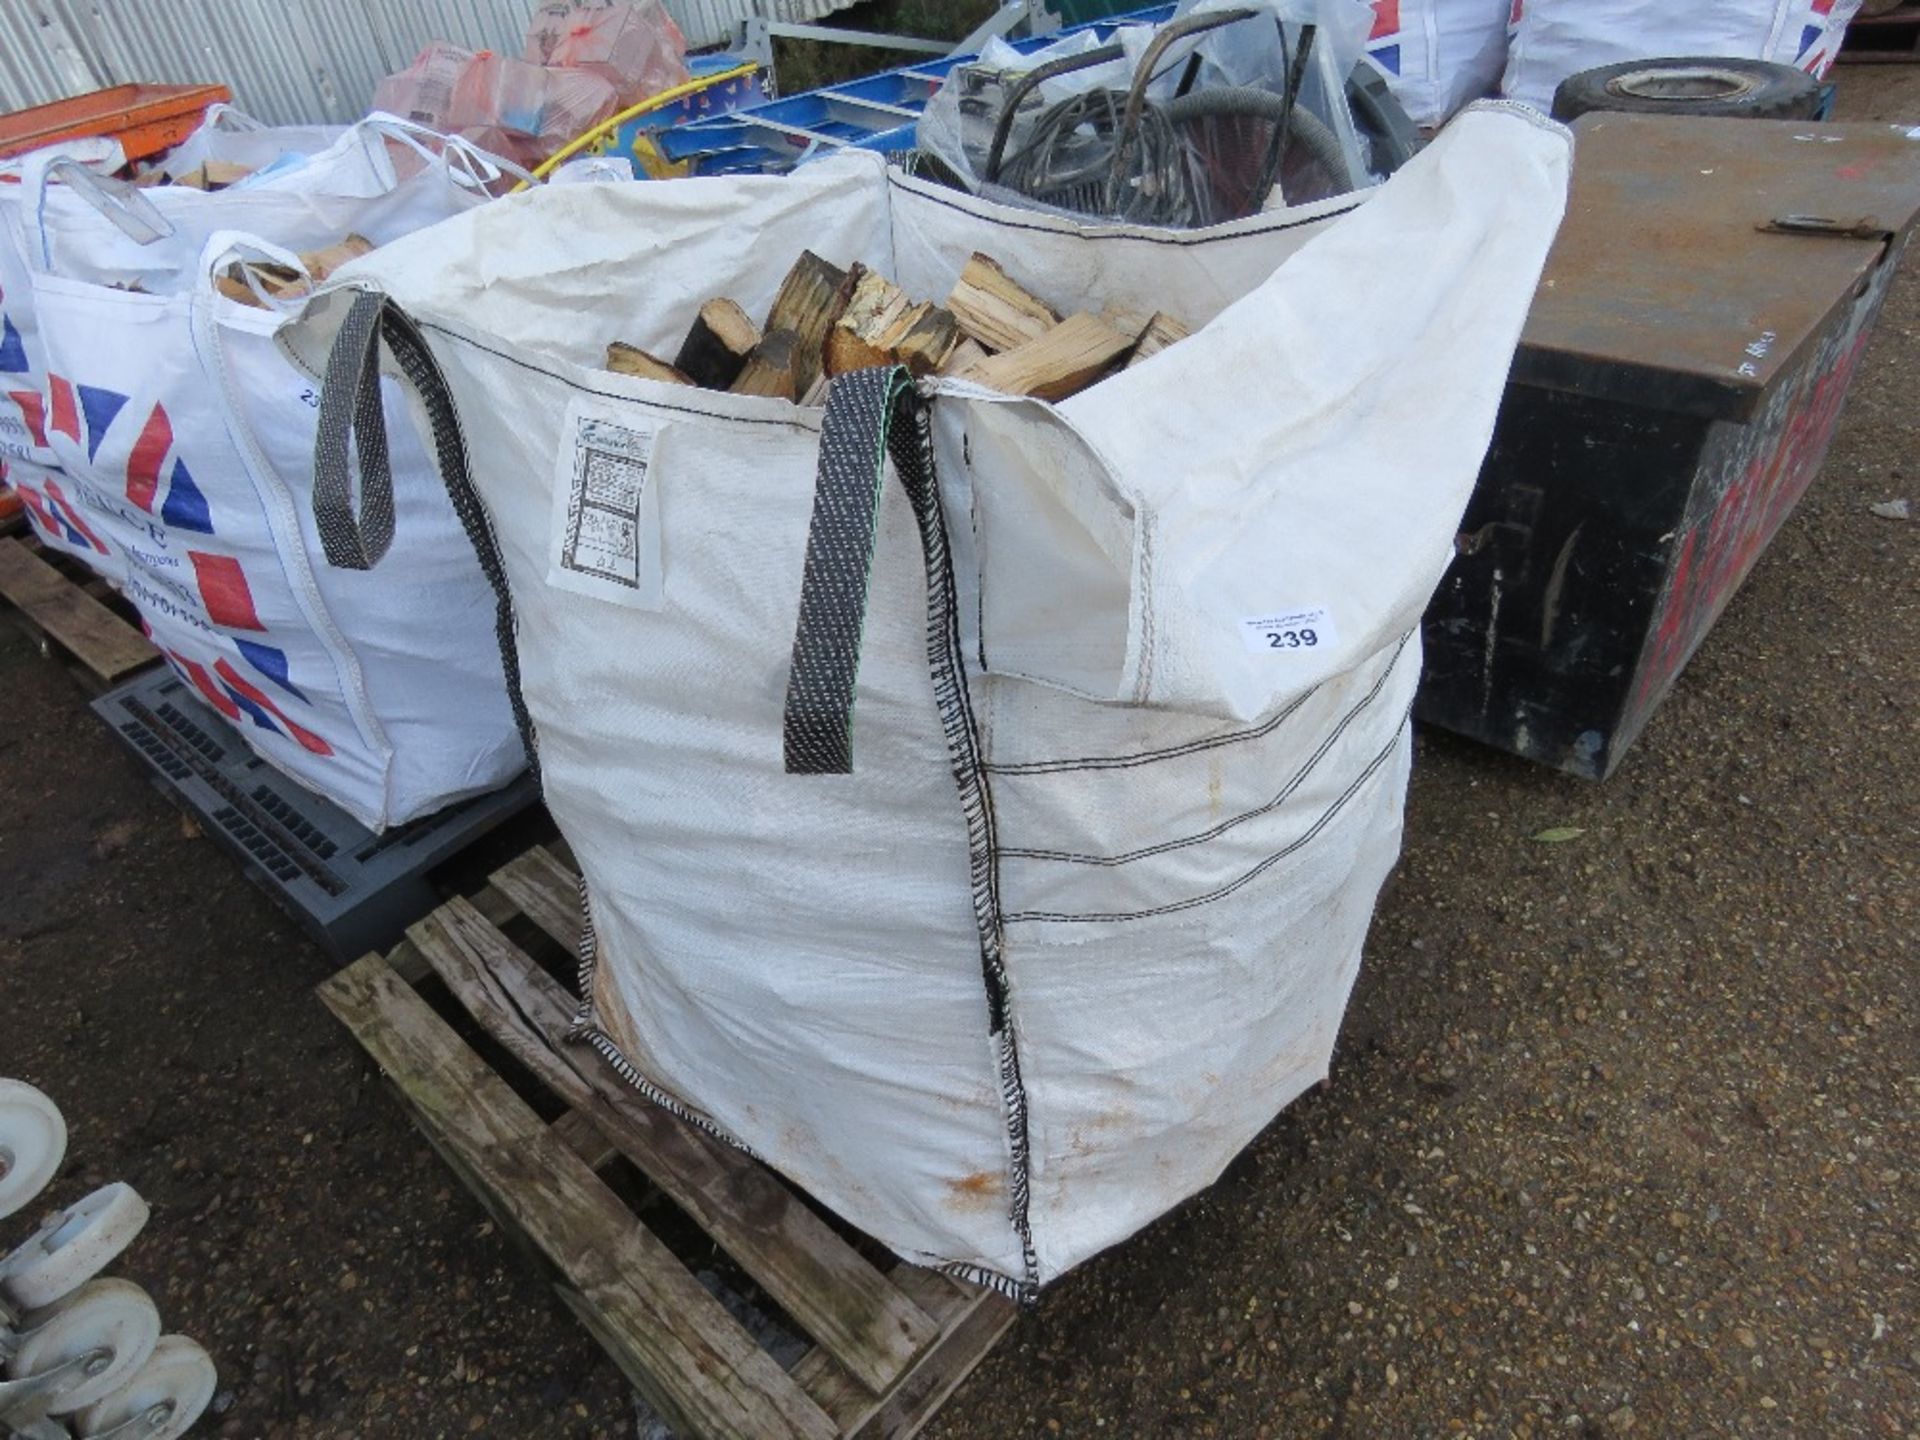 BULK BAG OF HARDWOOD FIRE WOOD LOGS. THIS LOT IS SOLD UNDER THE AUCTIONEERS MARGIN SCHEME, THERE